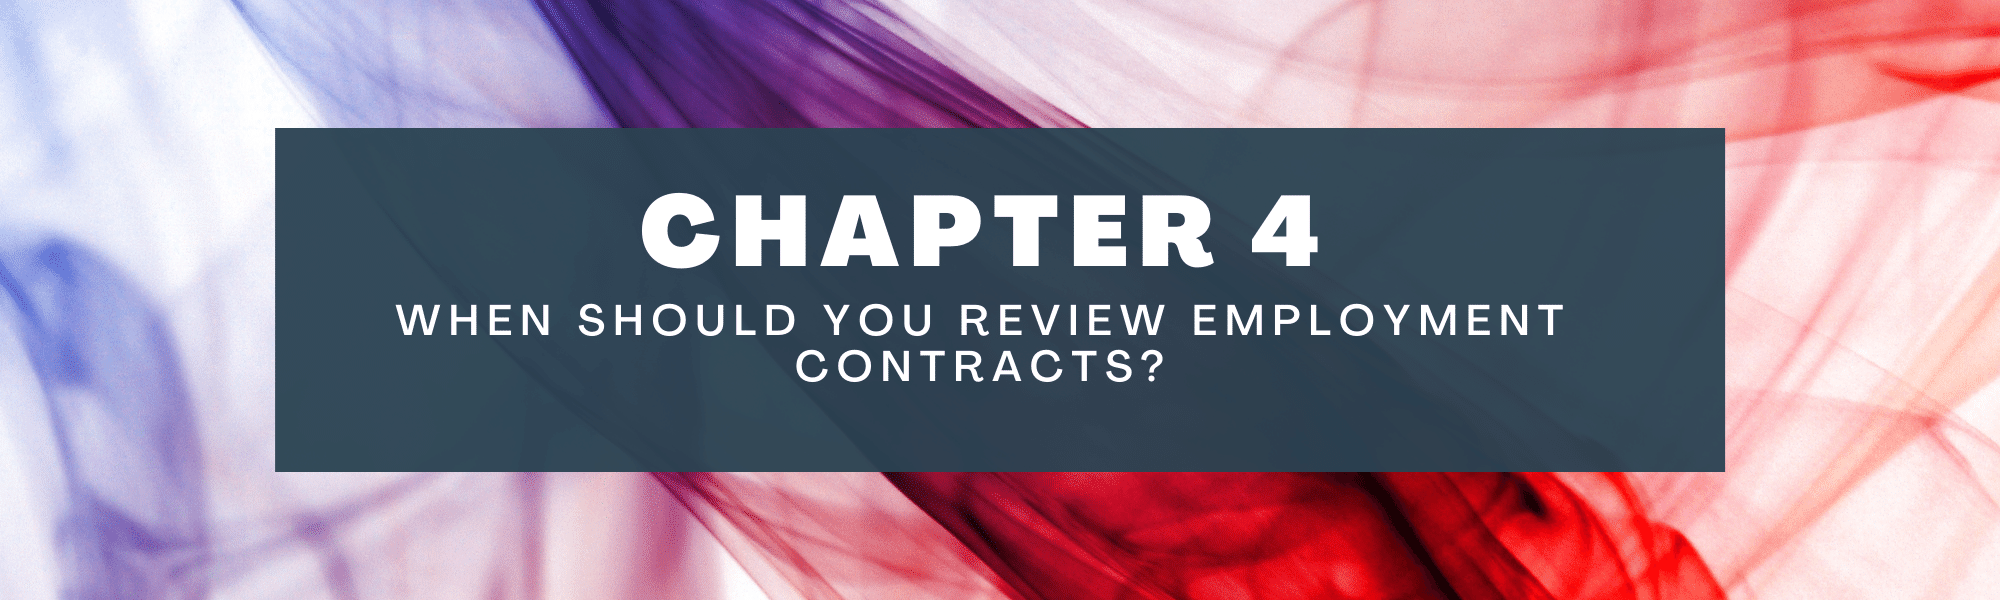 when should you review employment contracts?